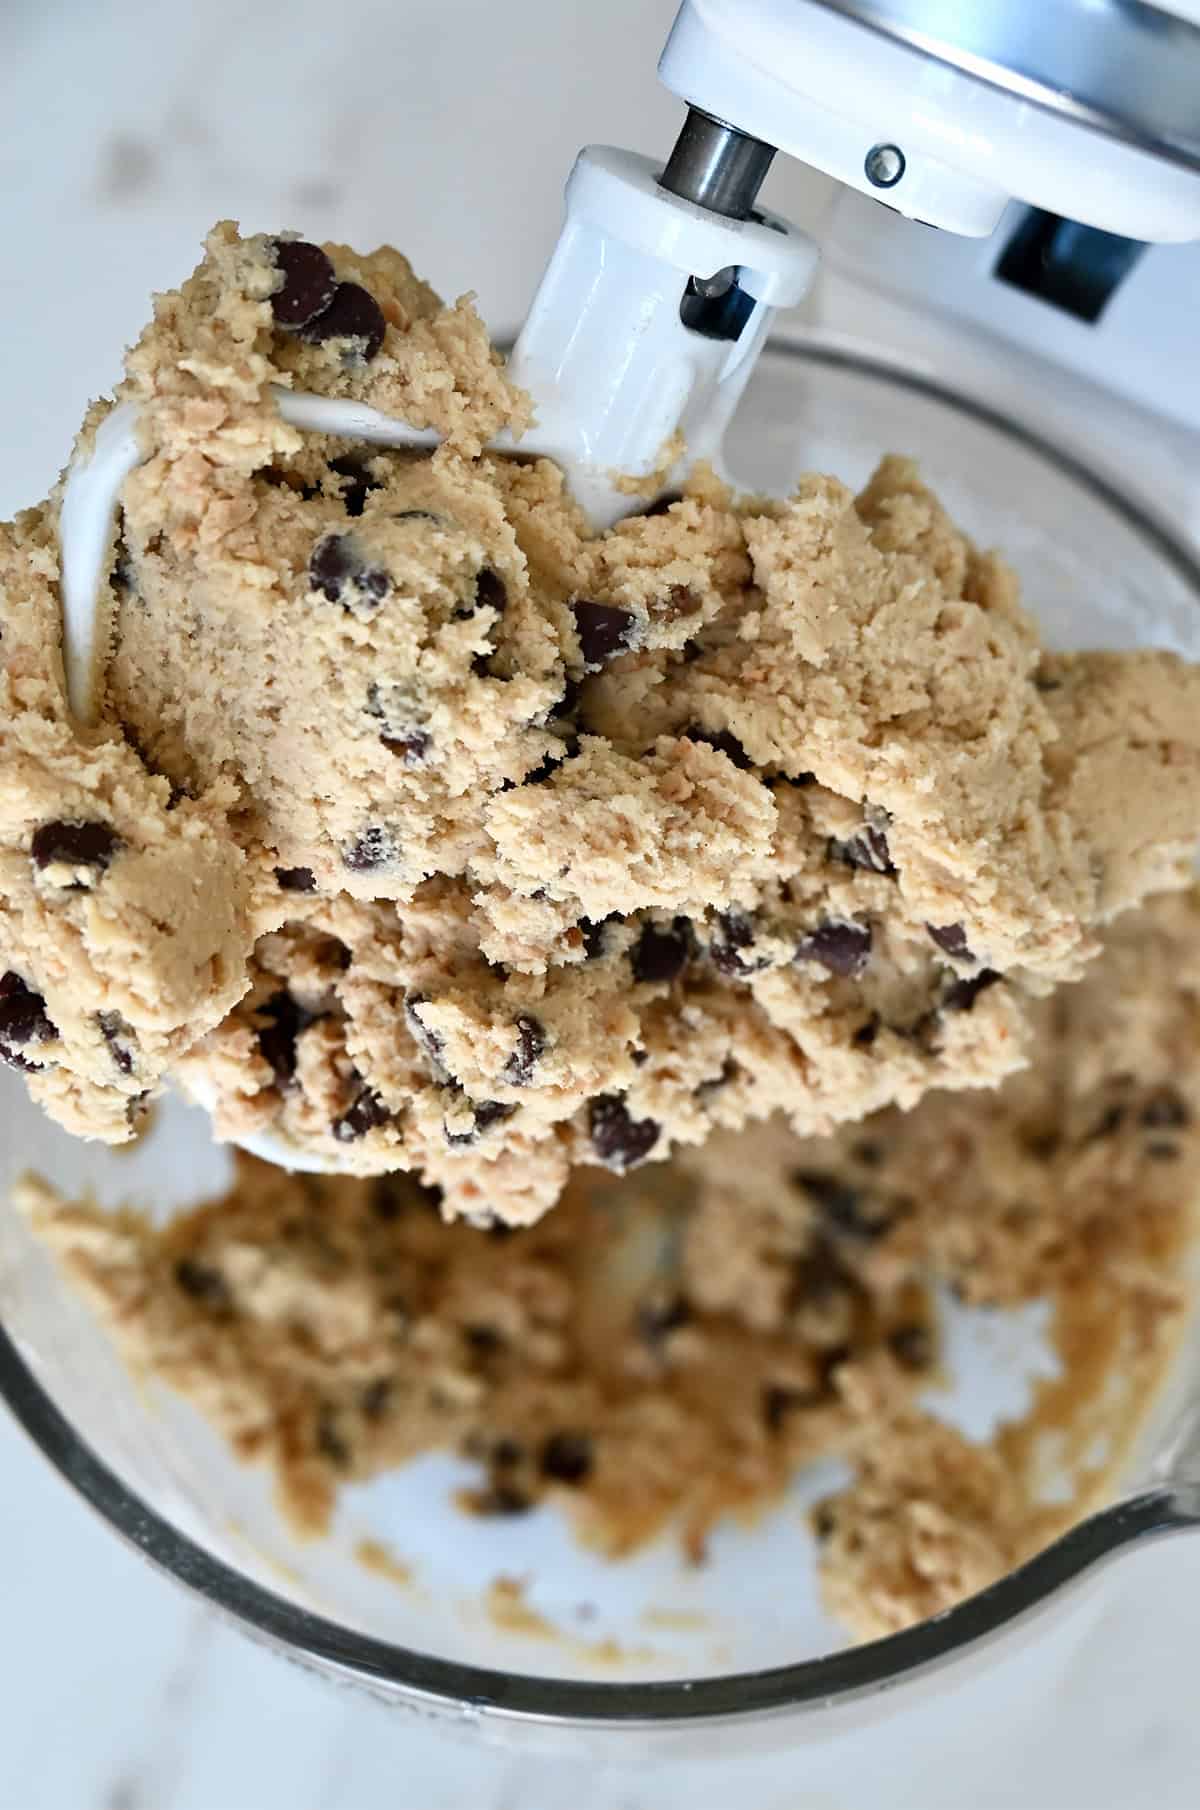 The paddle attachment of a stand mixer covered in toffee chocolate chip cookie dough.